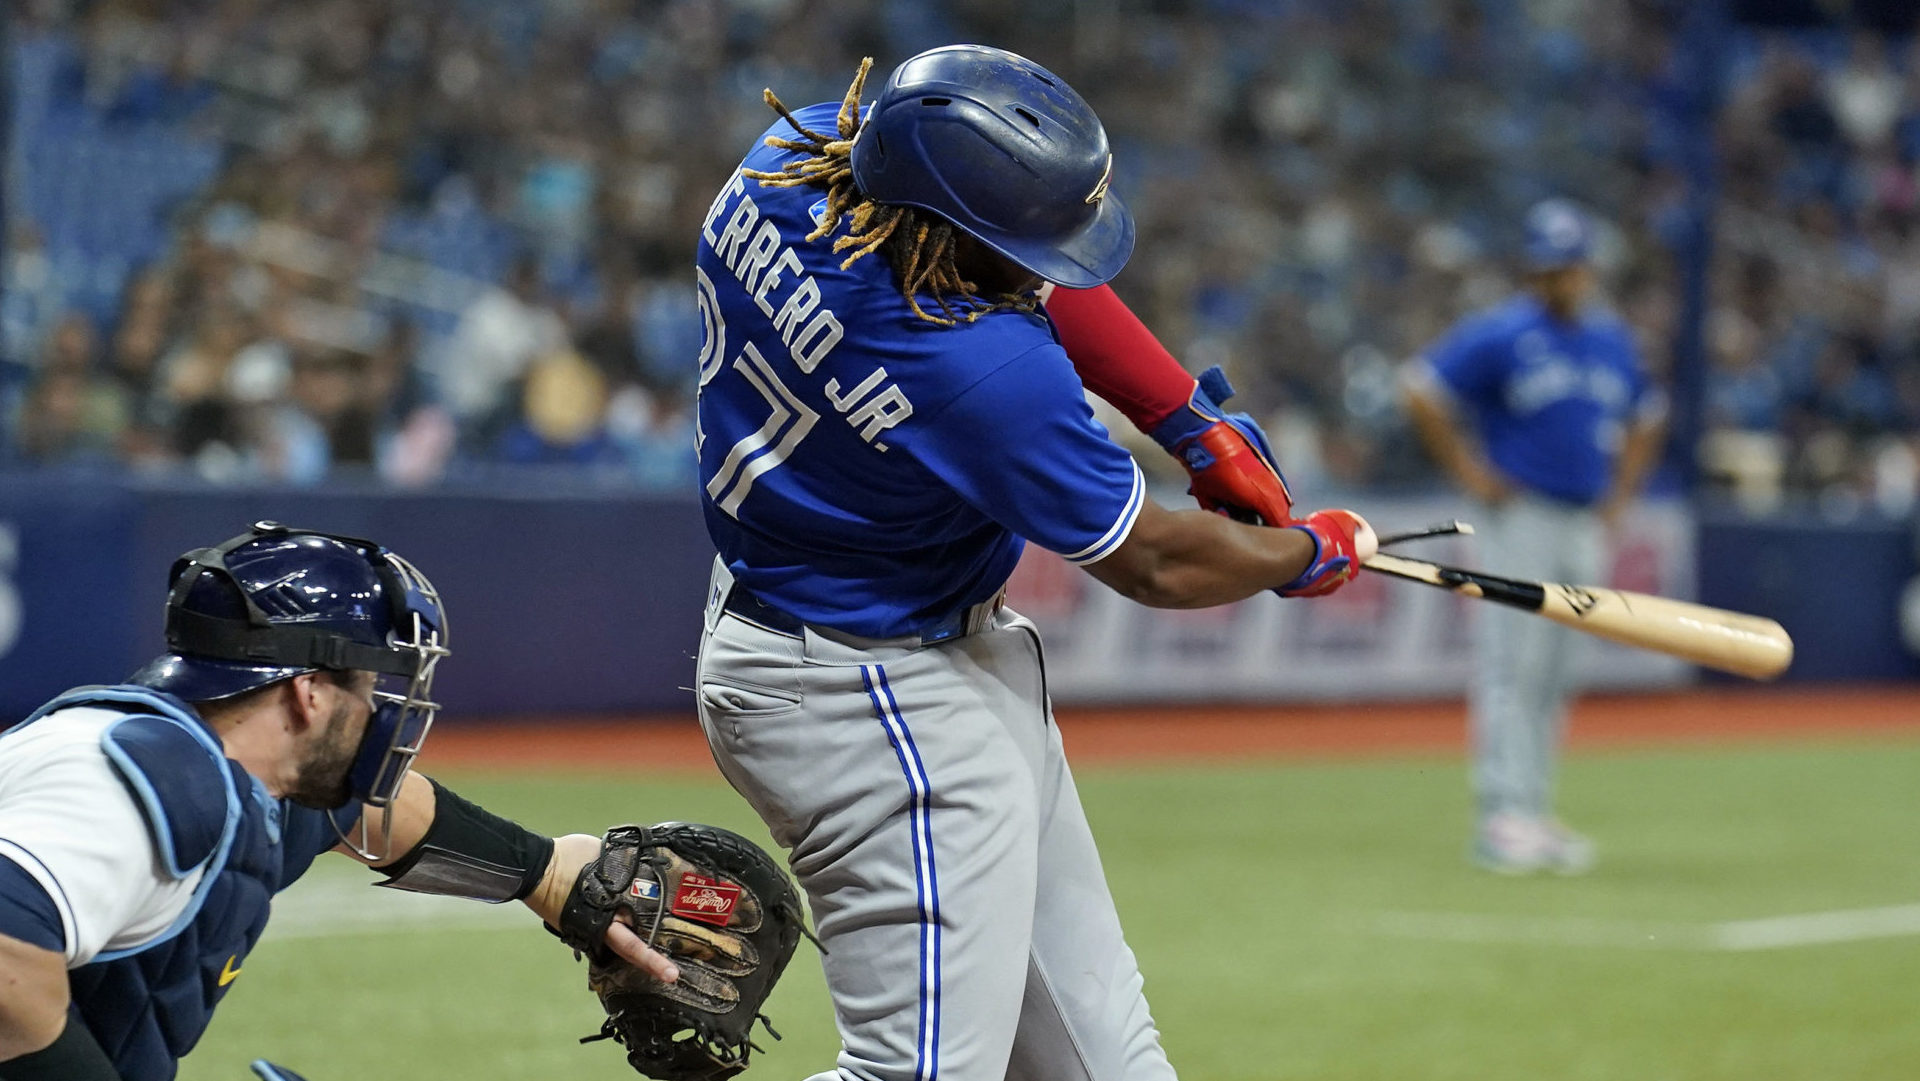 Toronto Blue Jays: Things aren't as bad as it may seem